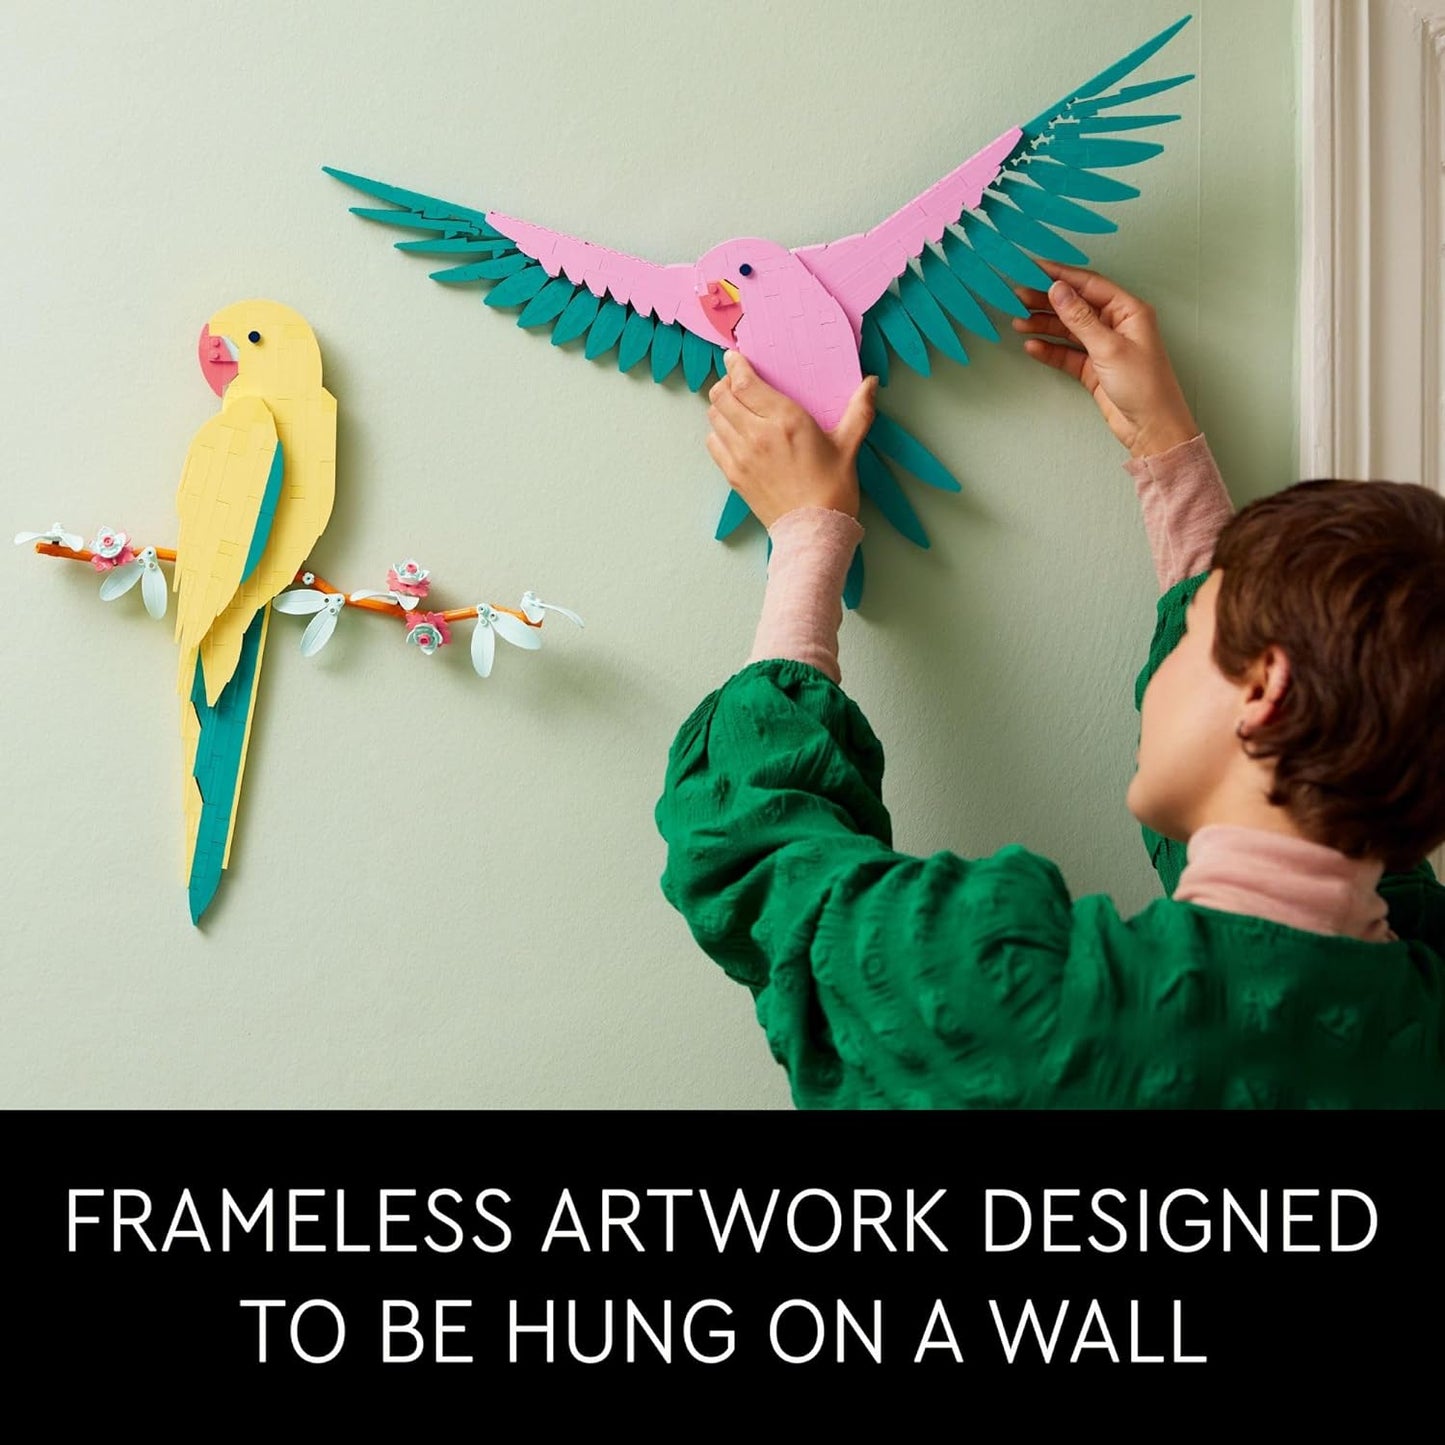 LEGO Art The Fauna Collection – Macaw Parrots, Nature Wall Artwork for Living Room Decor, Home Office Decor Idea, Build and Display Creative Activity for Artistic Adults, 31211